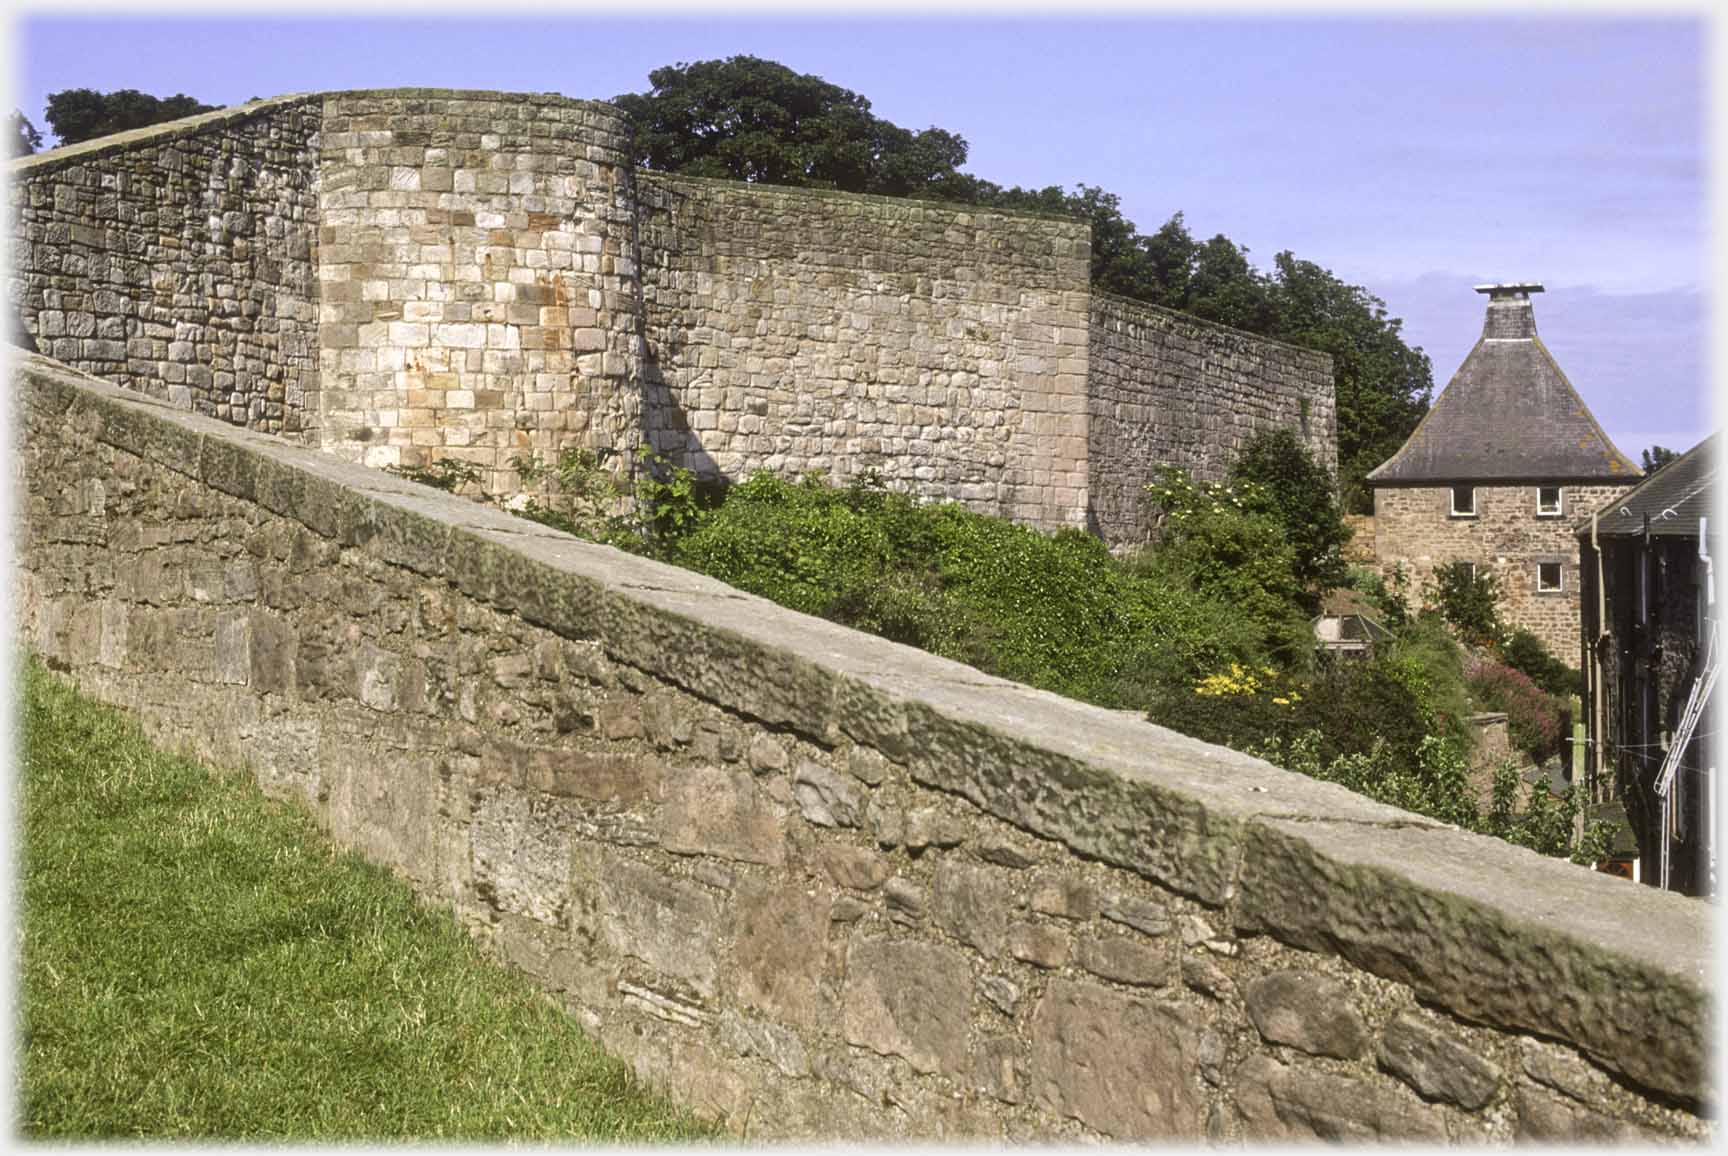 Folding town wall with cupola on building.